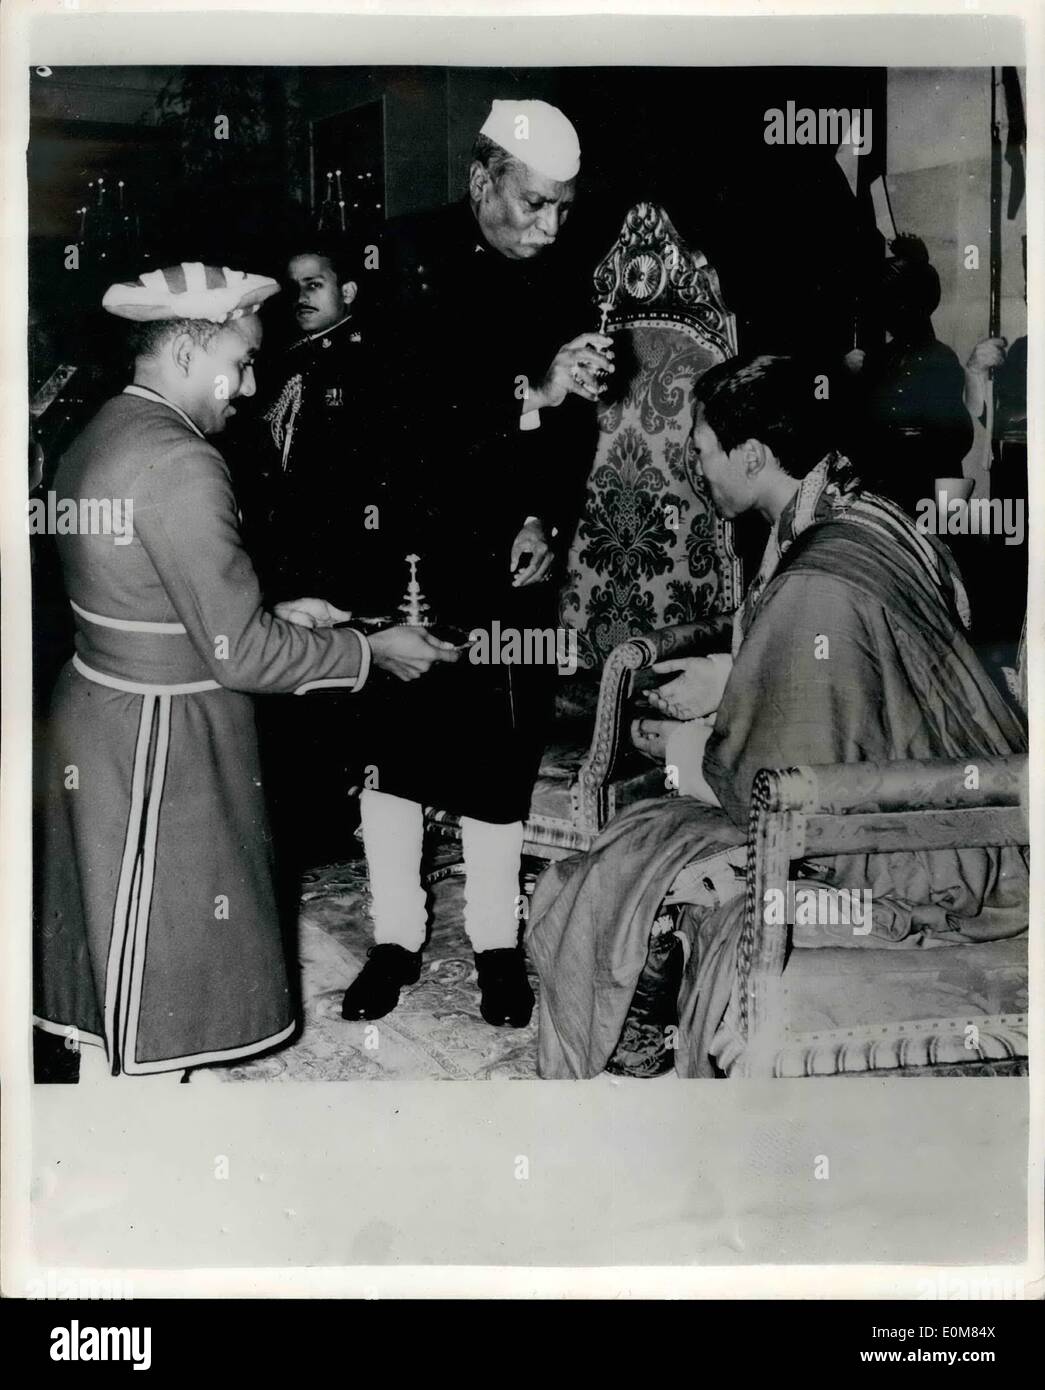 Jan. 16, 1954 - 16-1-54 The President receives his guest. Maharajah presents a shawl. The Maharaja of Bhutan with the Maharani recently paid a State visit to New Delhi where they were received with typical Indian ceremony, the customary presents being exchanged. The President of the Indian Republic, Dr. Rajendra Prasad presented the Maharaja with the traditional Ã¢â‚¬ËœPan' and the Maharaja presented the President with a beautiful shawl. Keystone Photo shows: Dr. Rajendra Prasad the Indian President sprinkles rose water on the Maharajah during the ceremony in New Delhi. Stock Photo